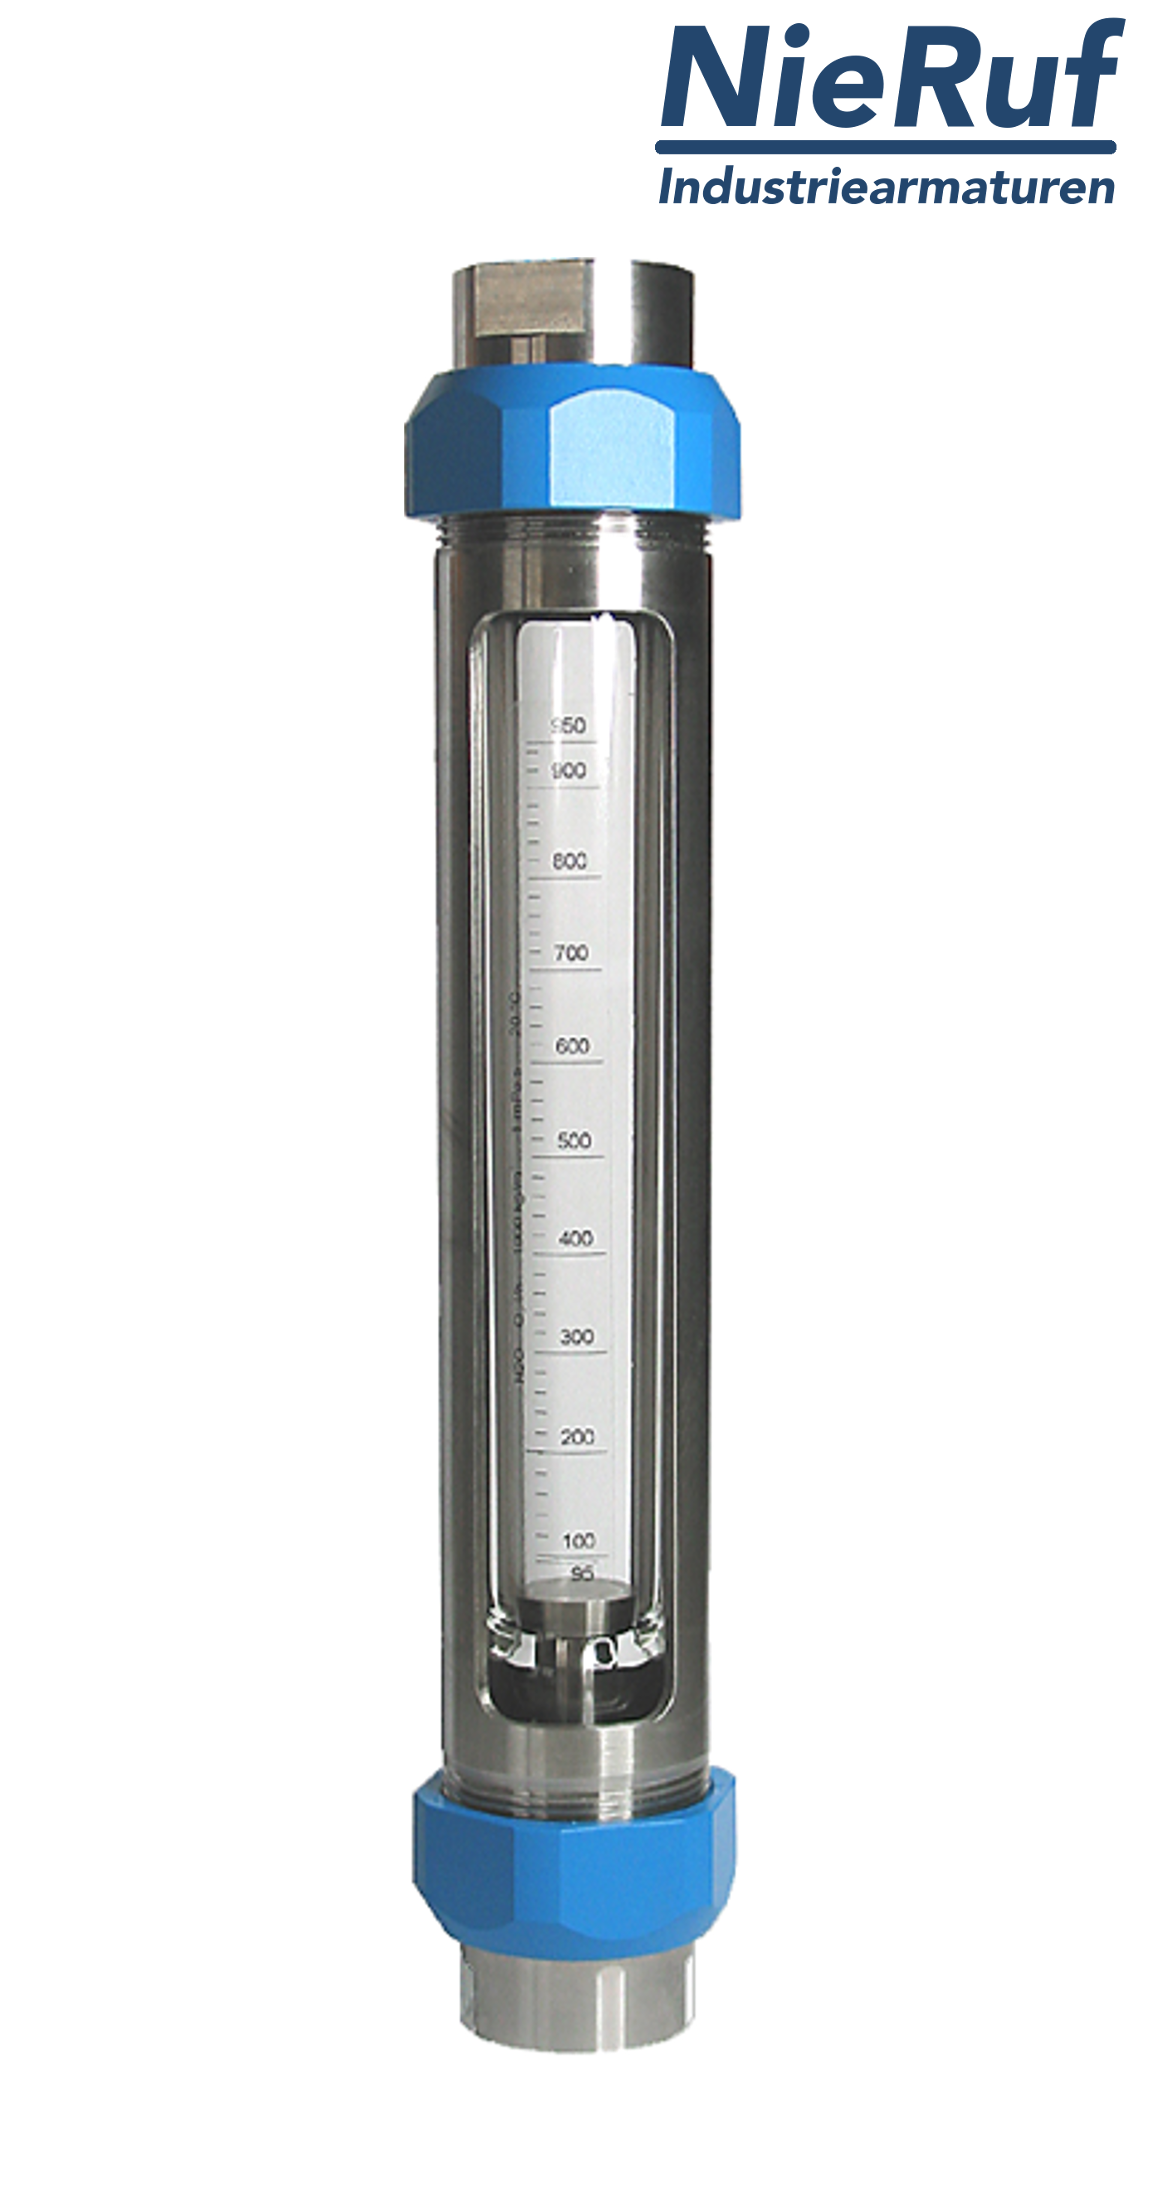 Variable area flowmeter stainless steel + borosilicate 1/4" inch 50.0 - 500.0 l/h water FKM